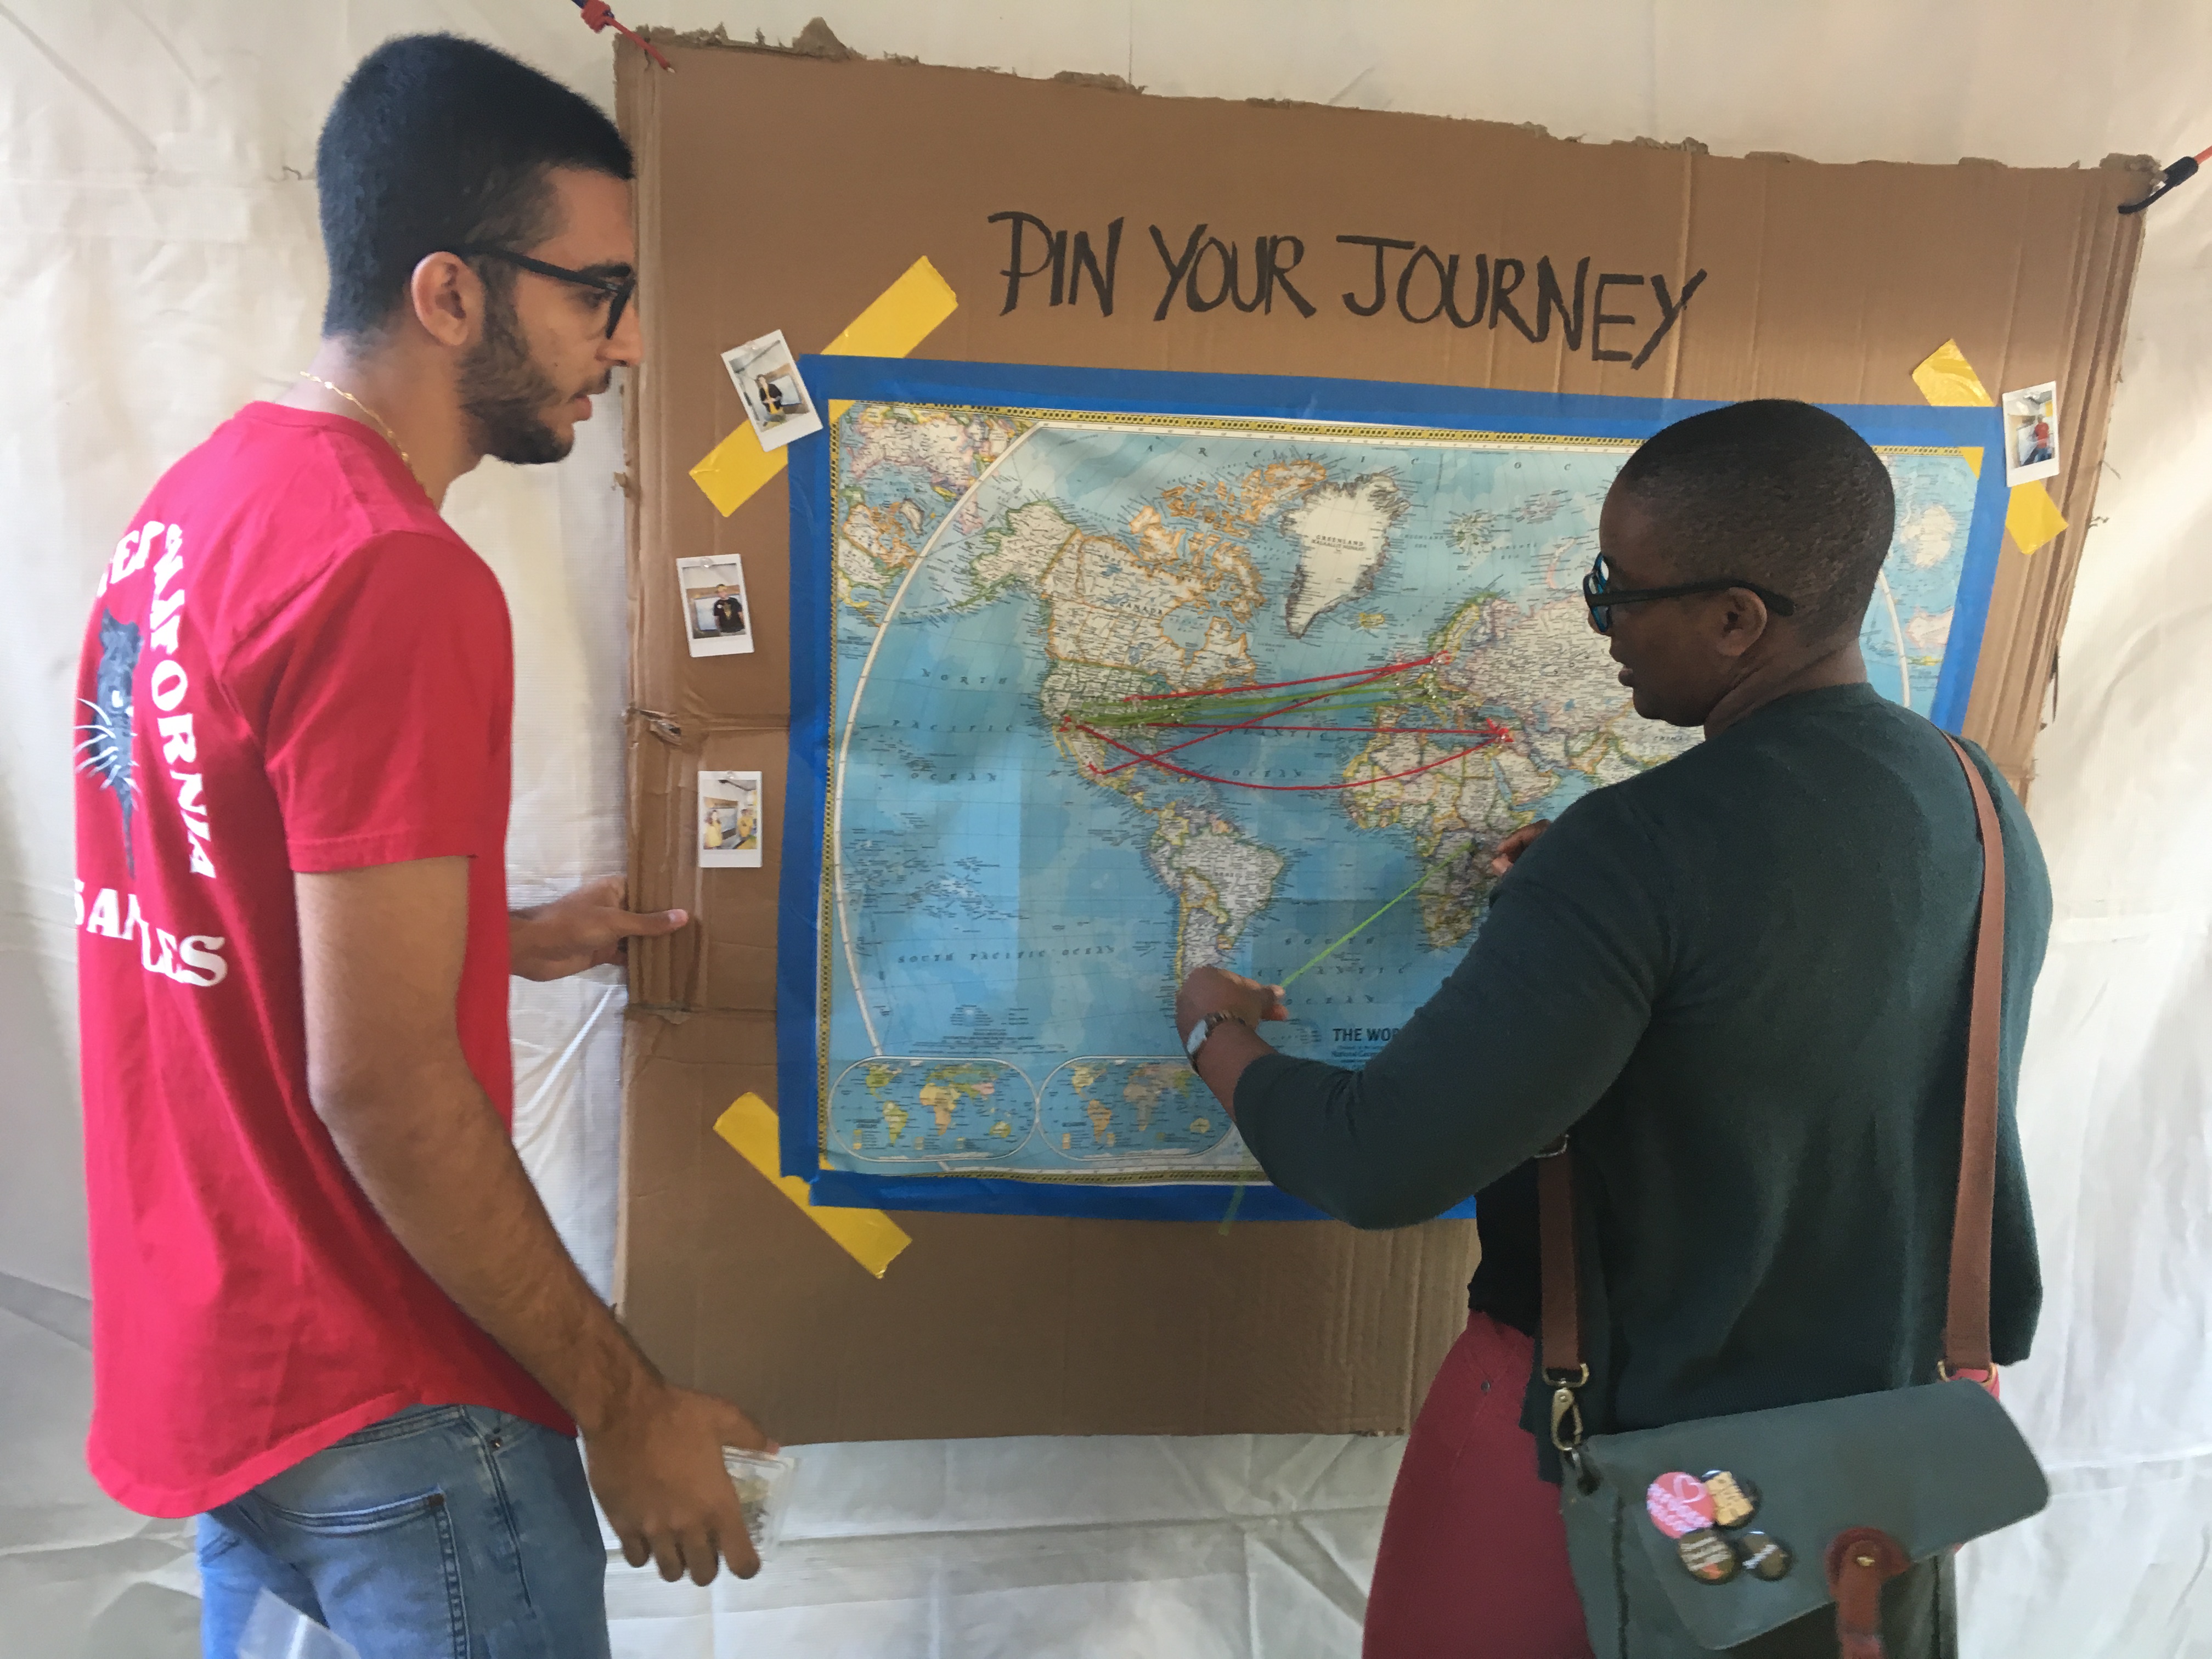 Two people working on a "pin your journey" map.